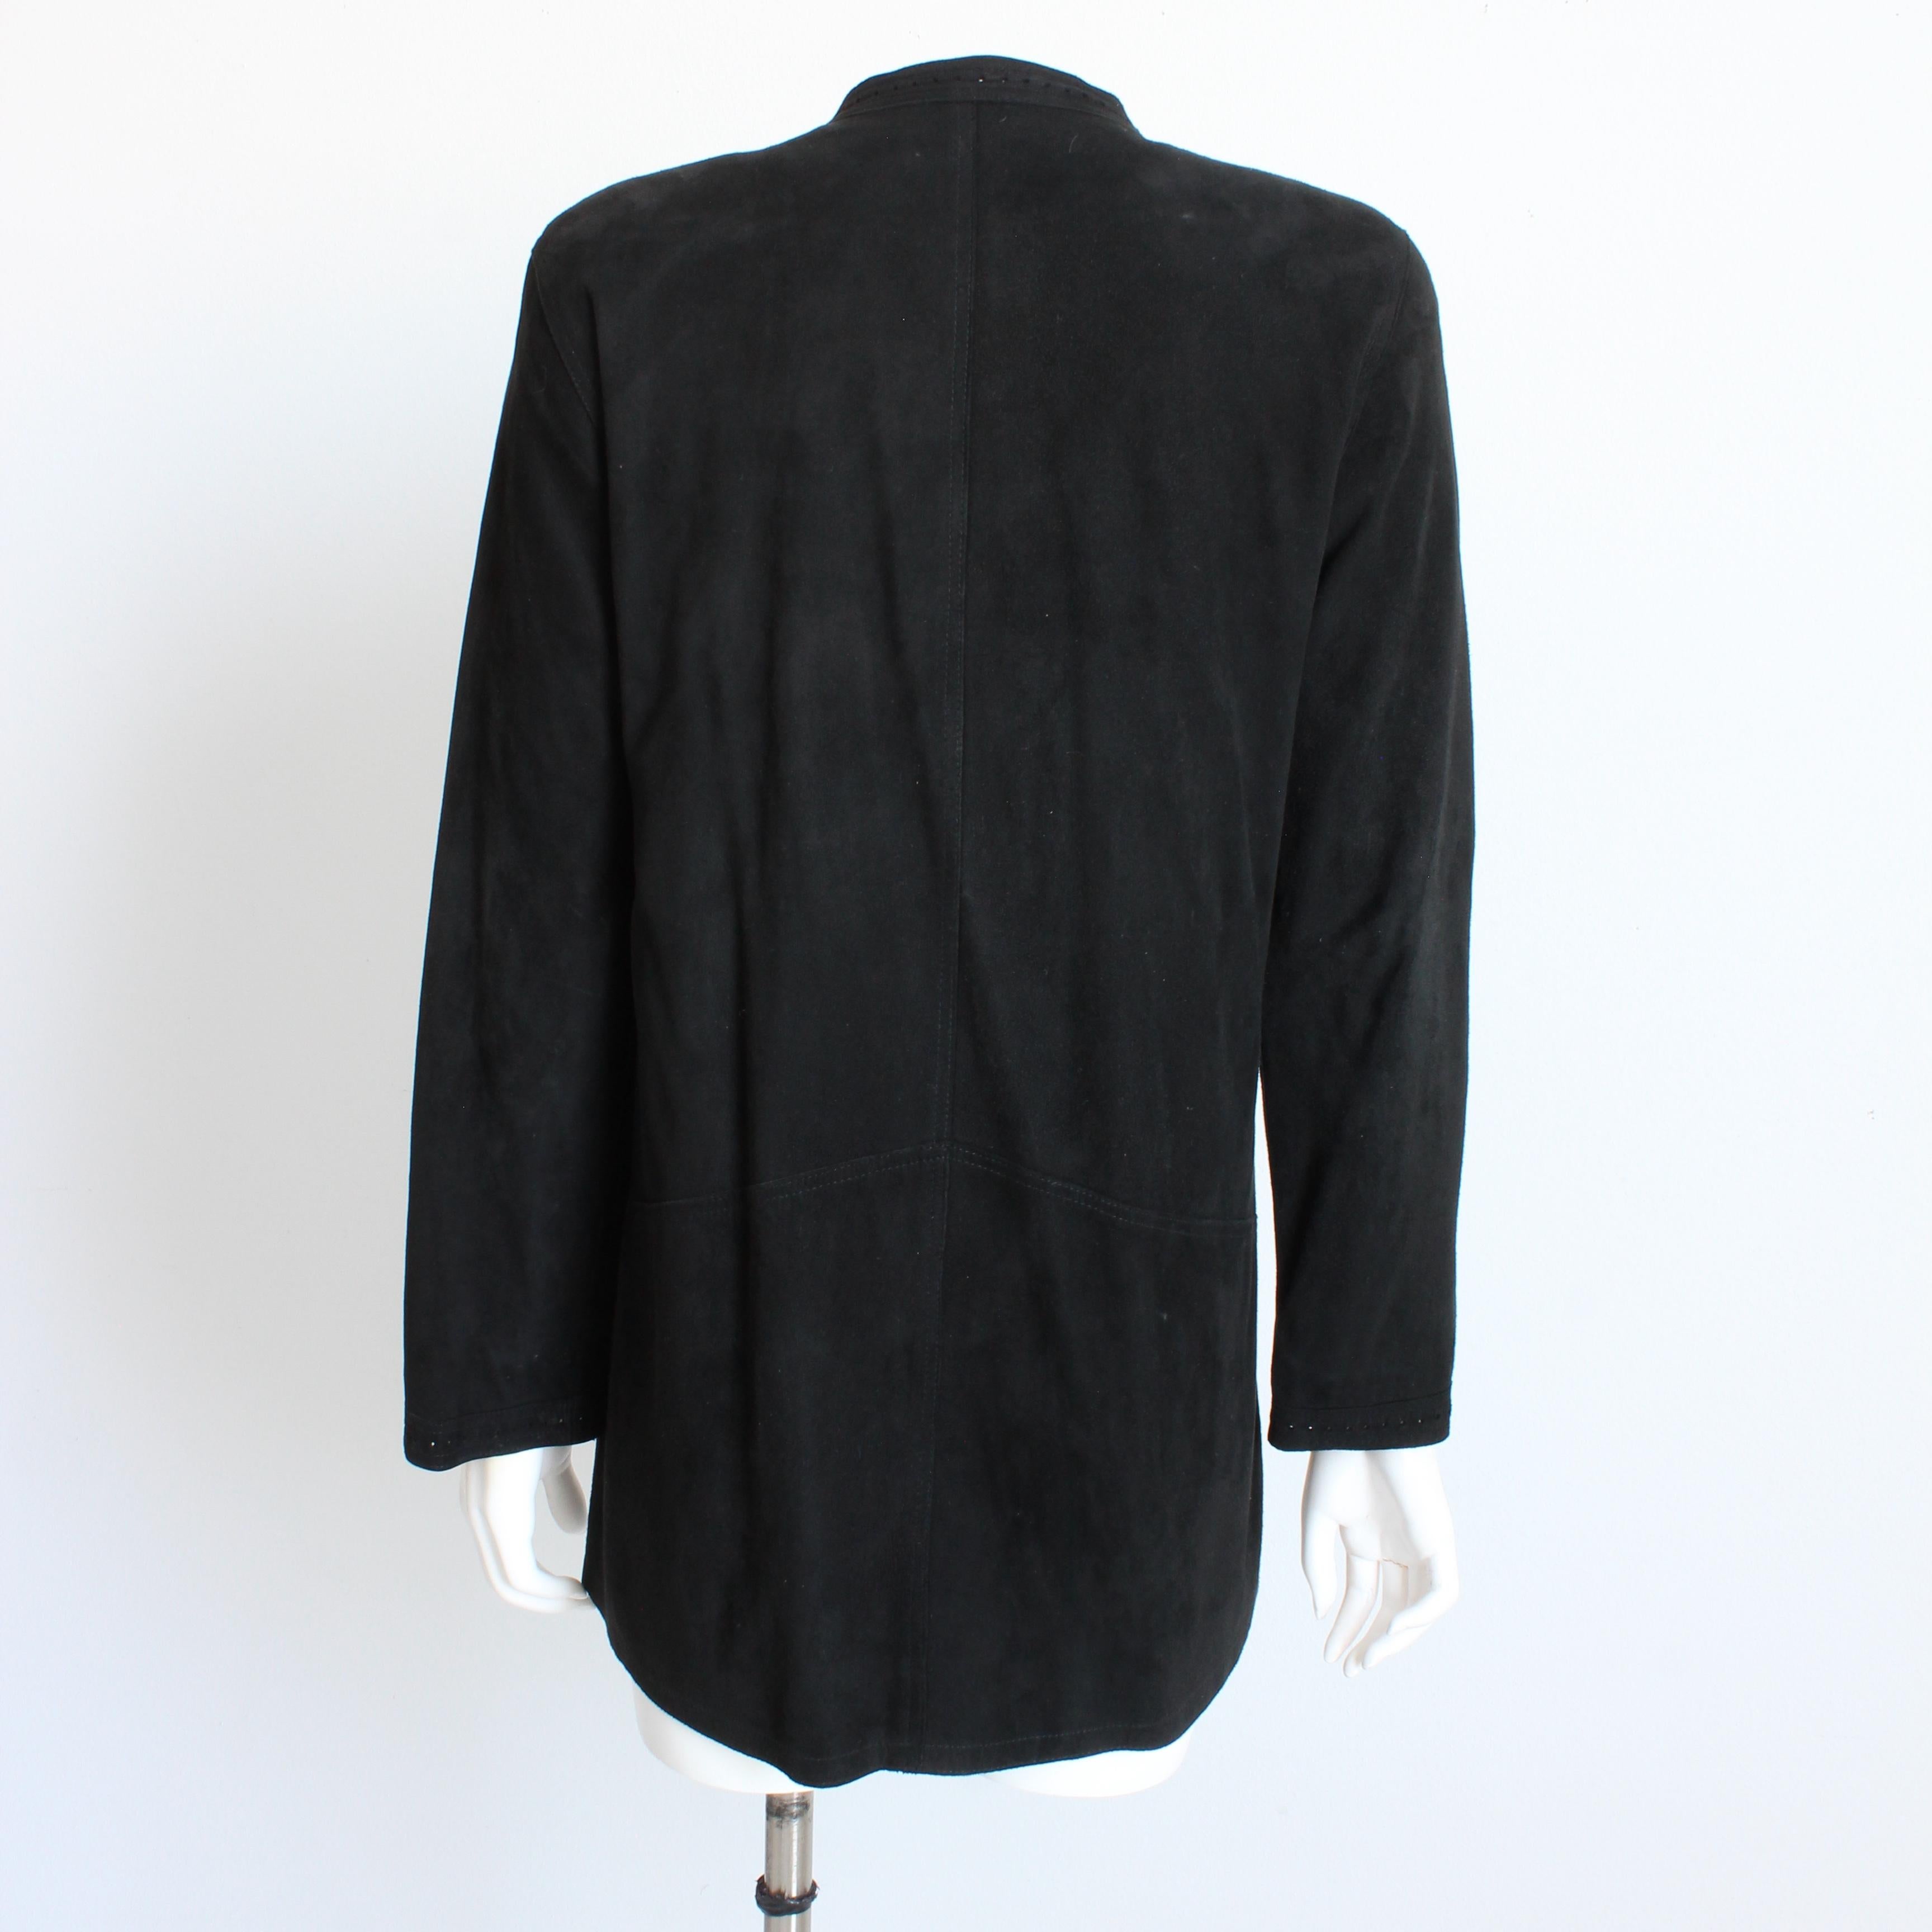 Jean Muir Black Suede Jacket with Perforated Trim and Lucite Buttons Vintage Sz8 In Good Condition For Sale In Port Saint Lucie, FL